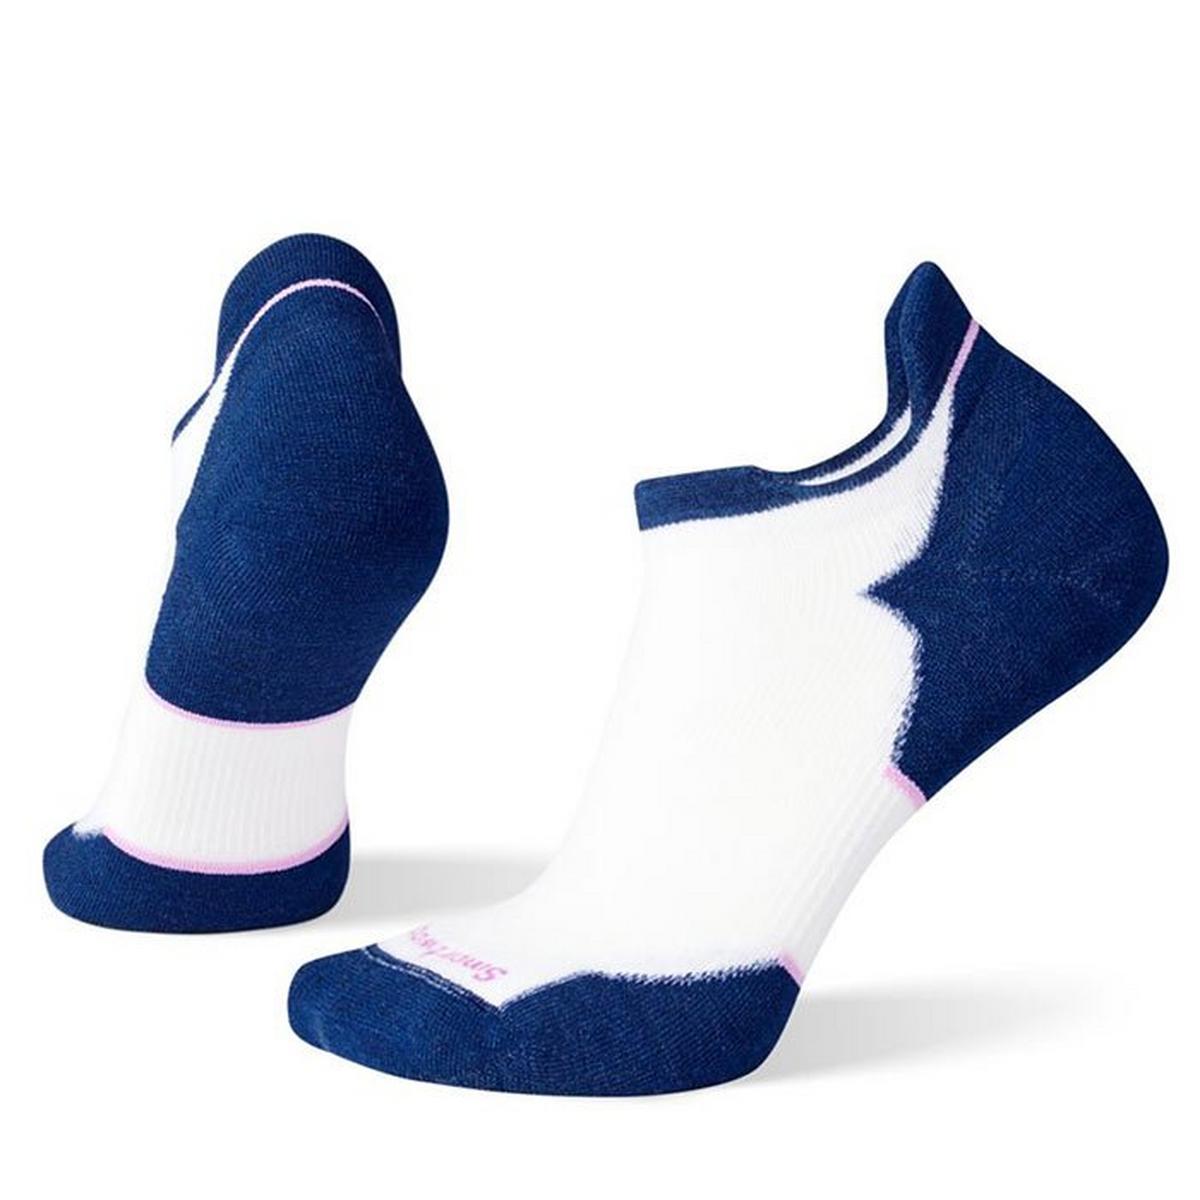 Women's Run Targeted Cushion Low Ankle Sock